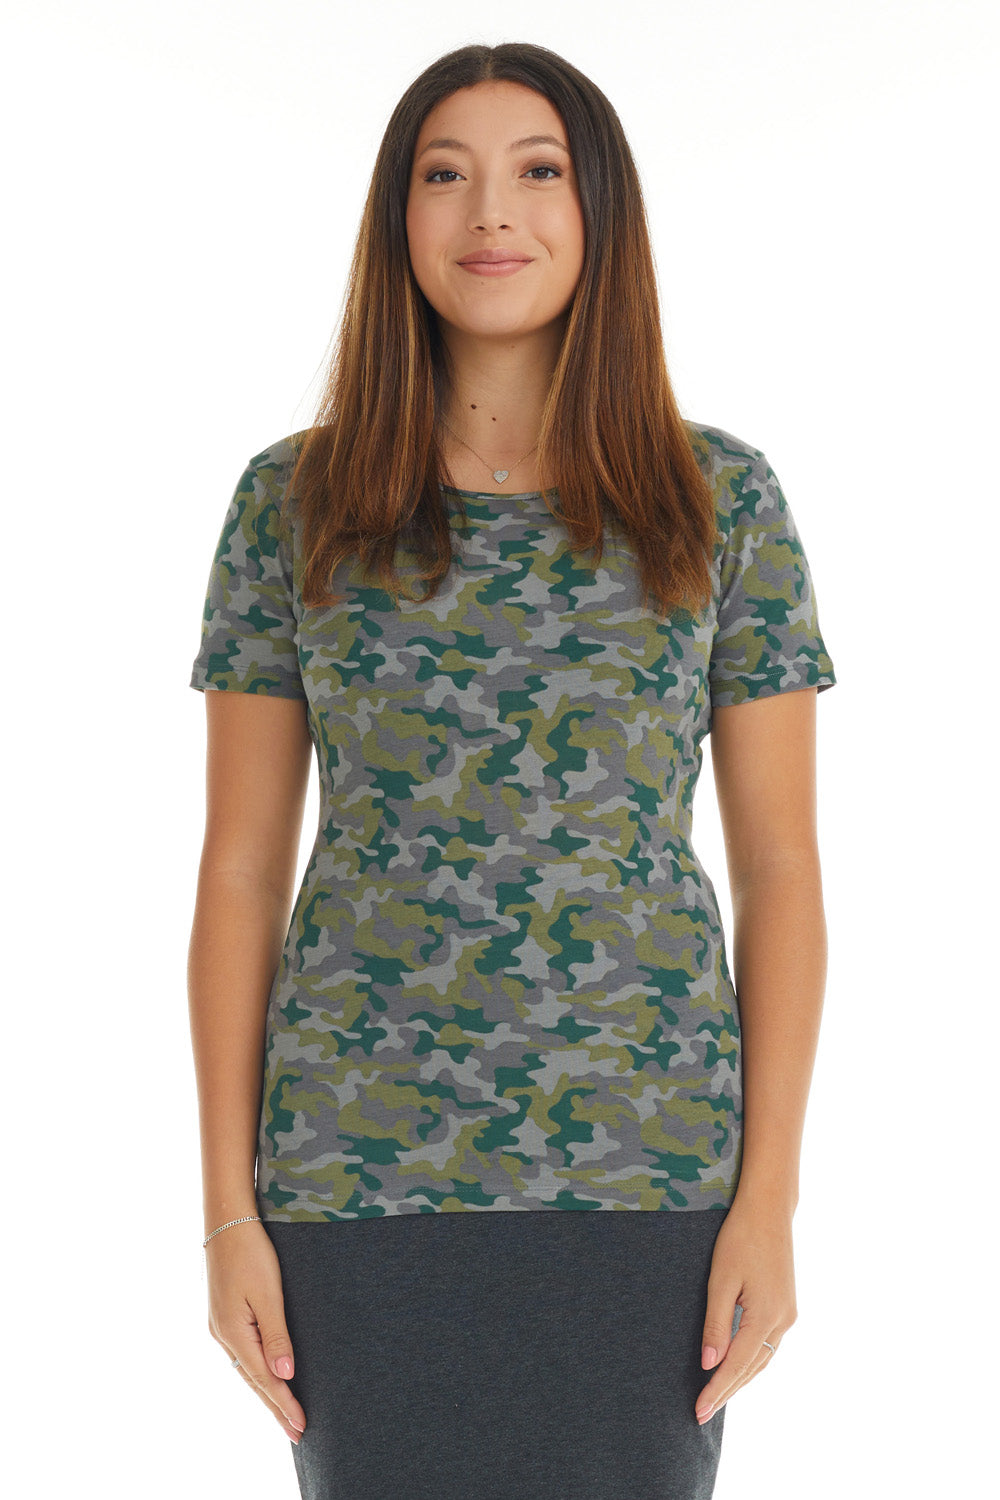 green mix camo sleeve top to wear with jeans